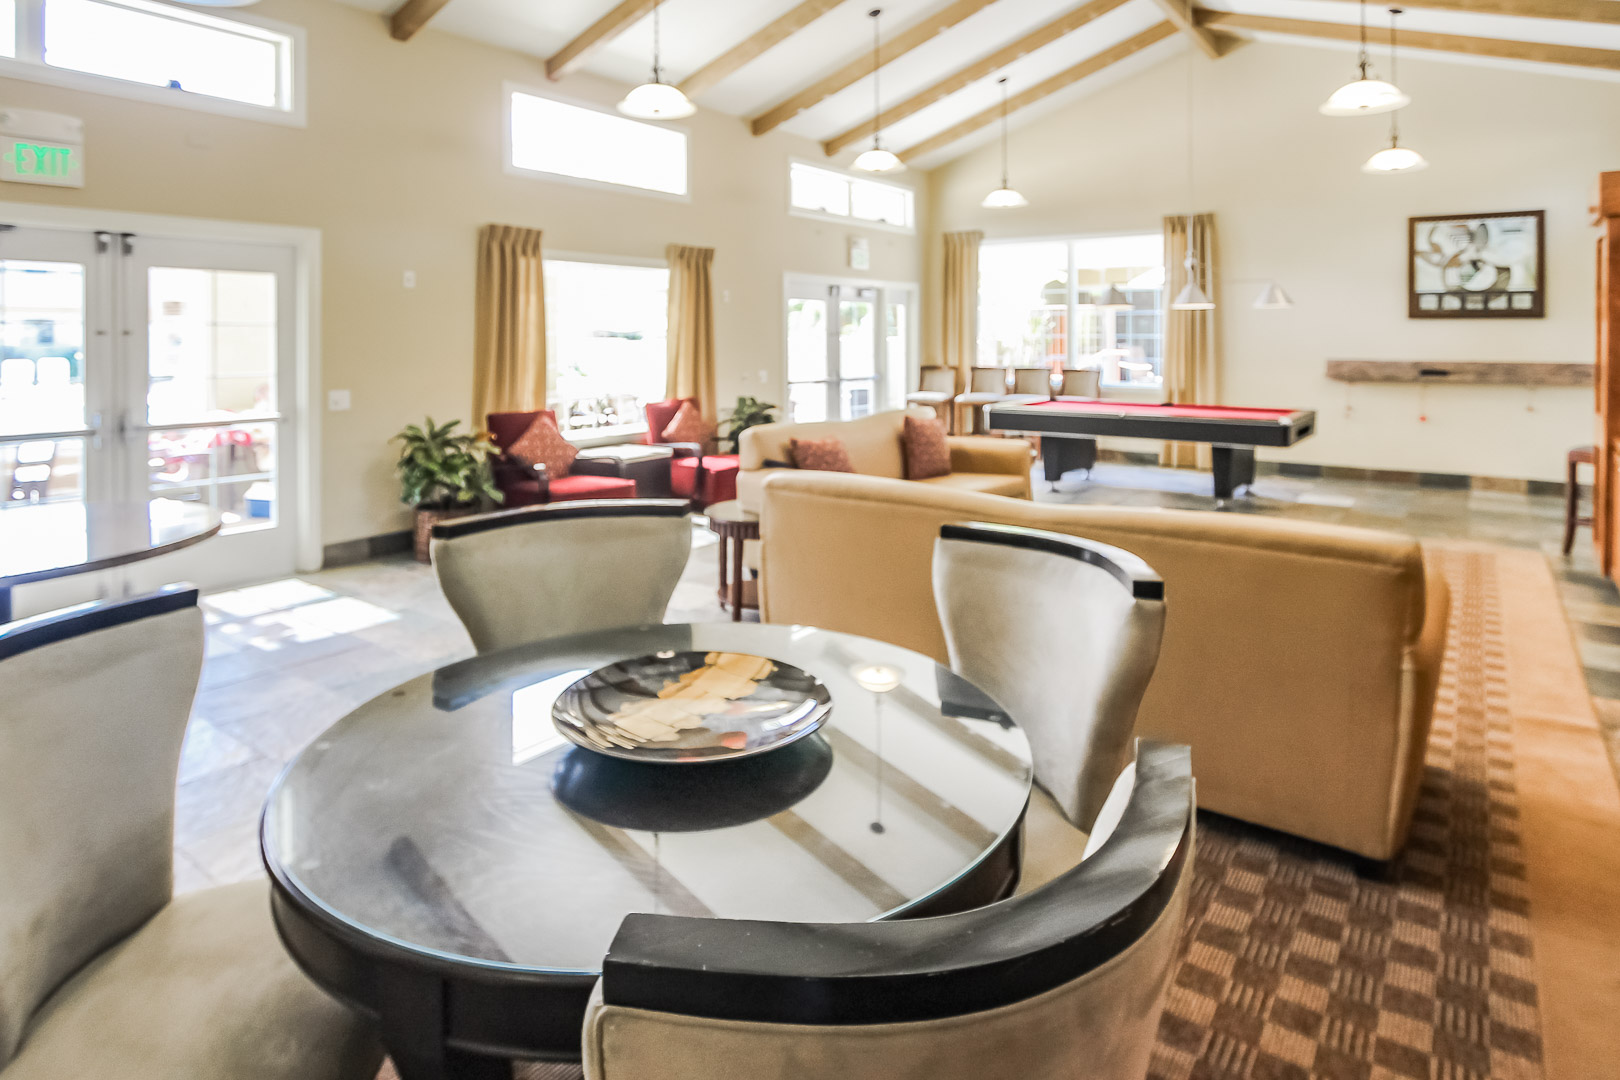 A pool table and lounging area at VRI's Winner Circle Resort in California.